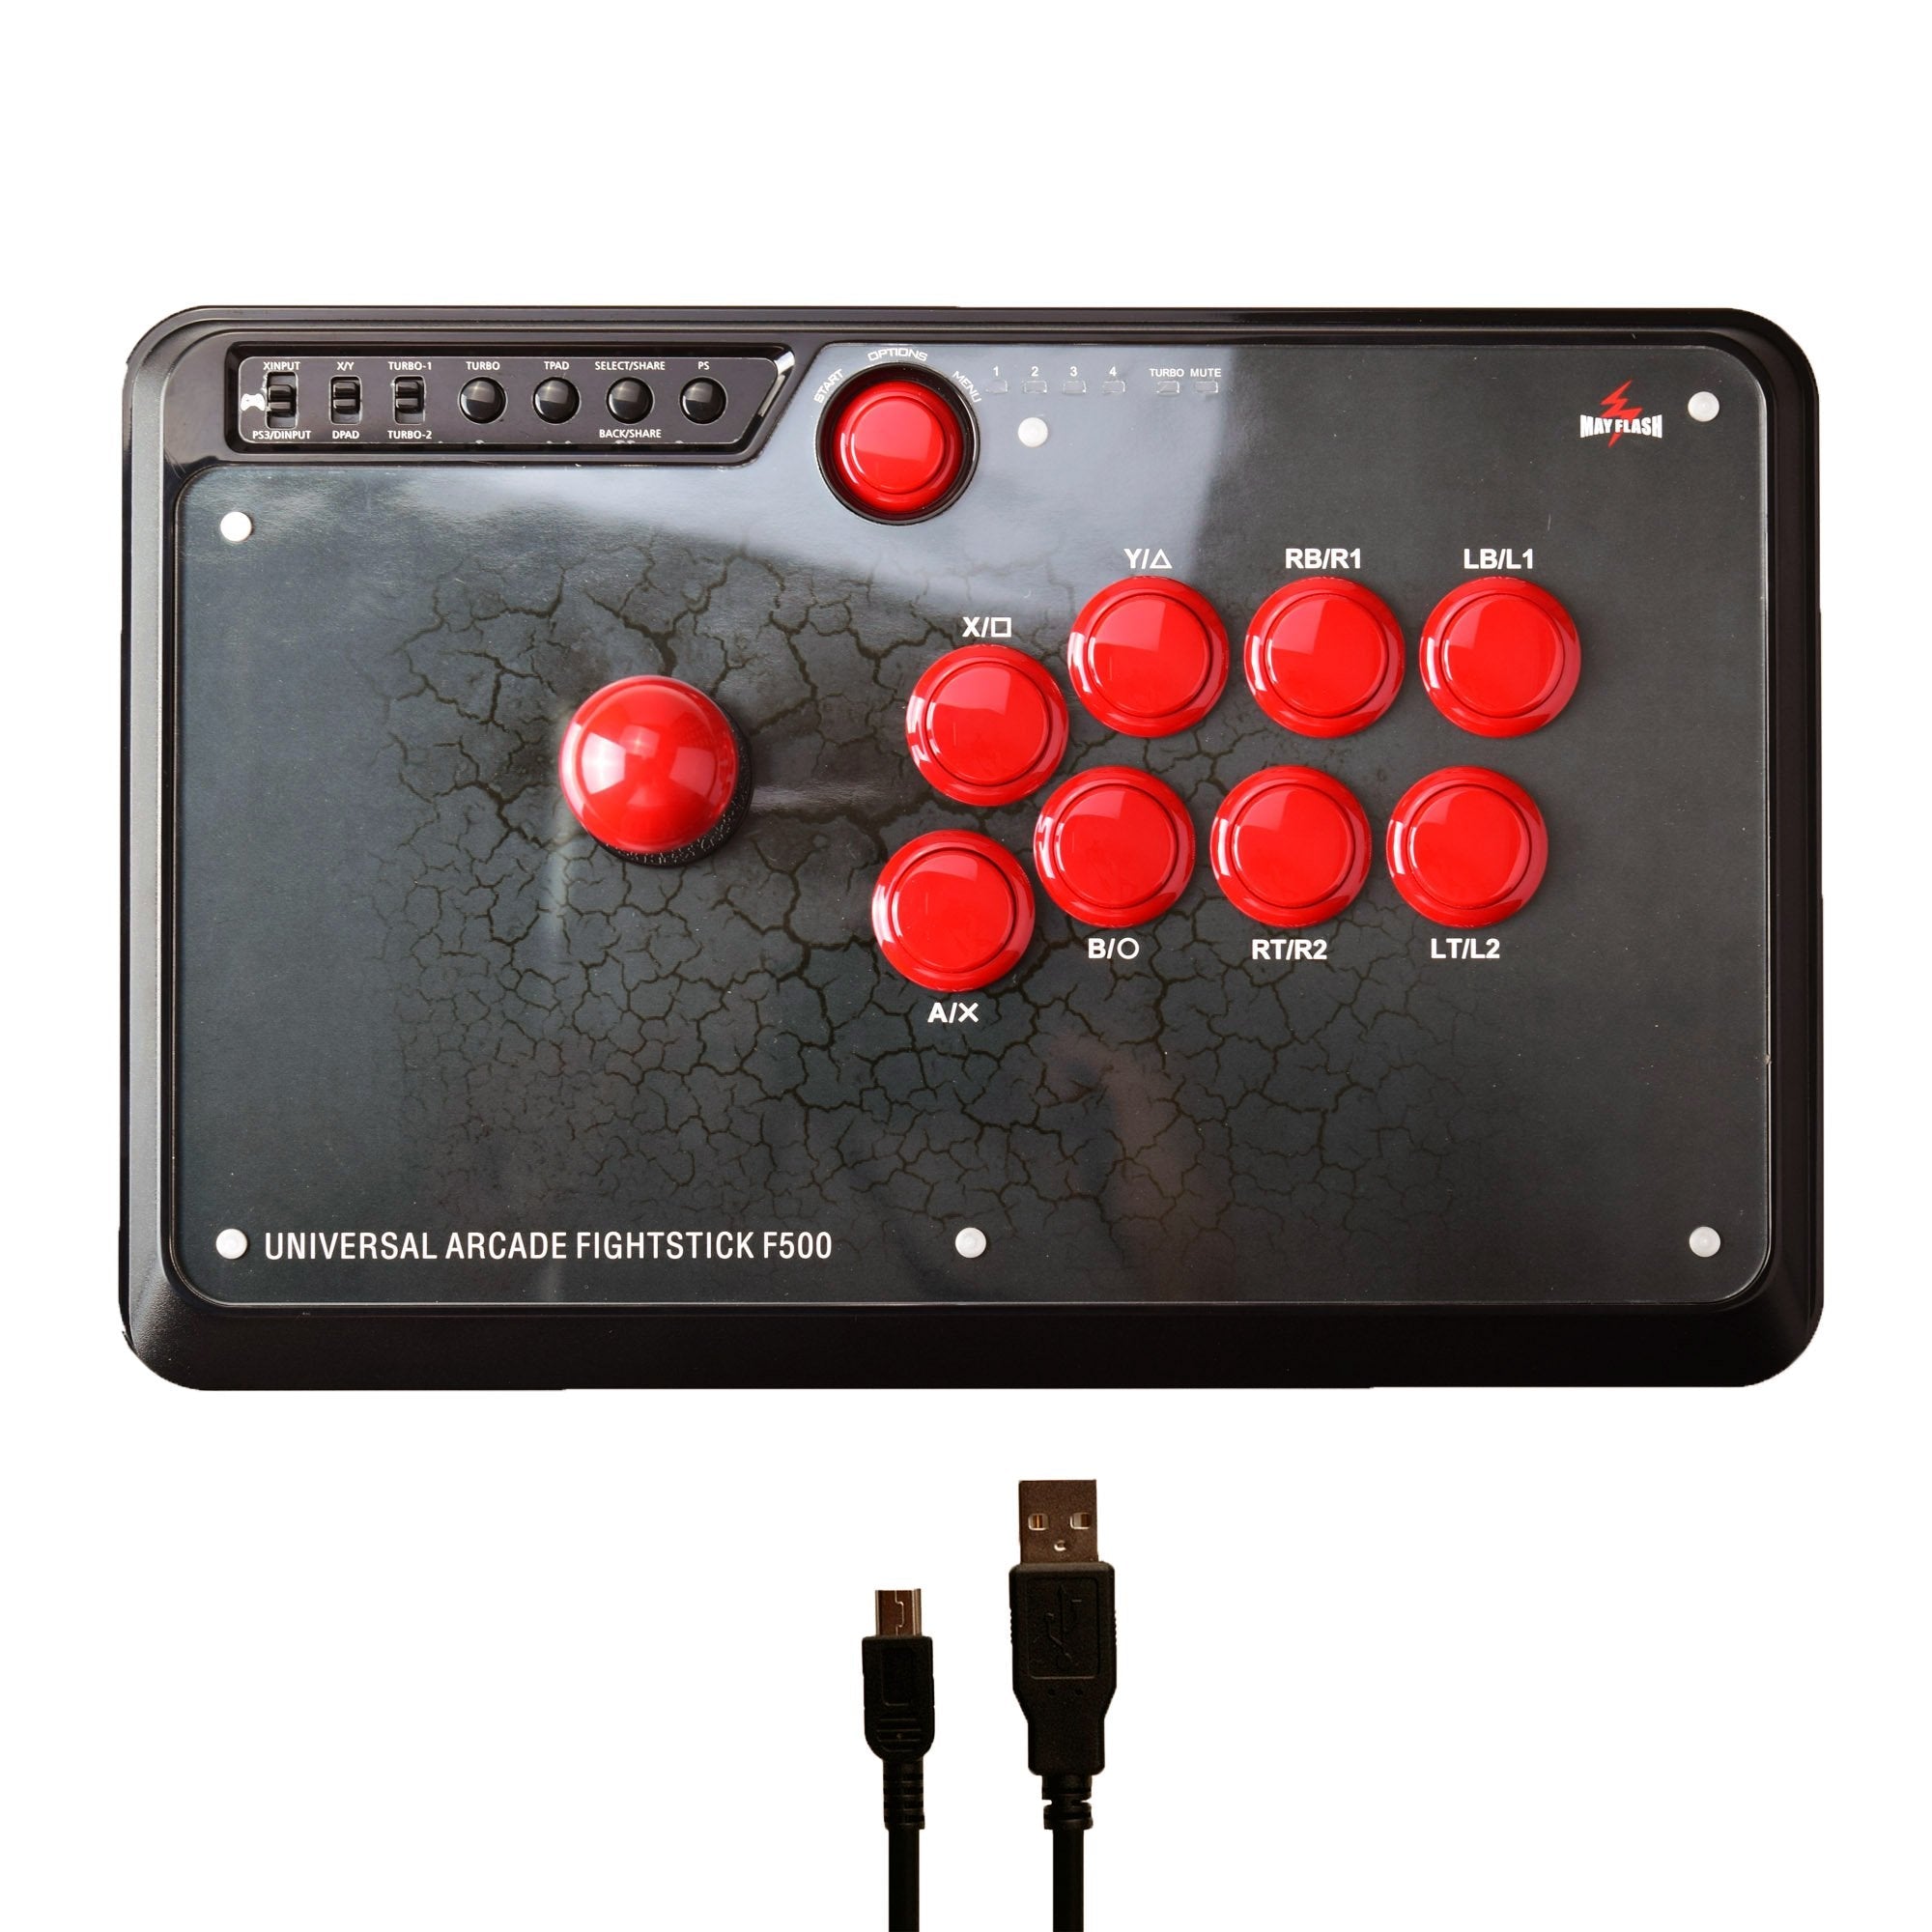 Gaming-MayFlash Arcade Fightstick F500v2 for PS4 PS3 Xbox One 360 PC Android Nintendo Switch NeoGeo Mini (F500)